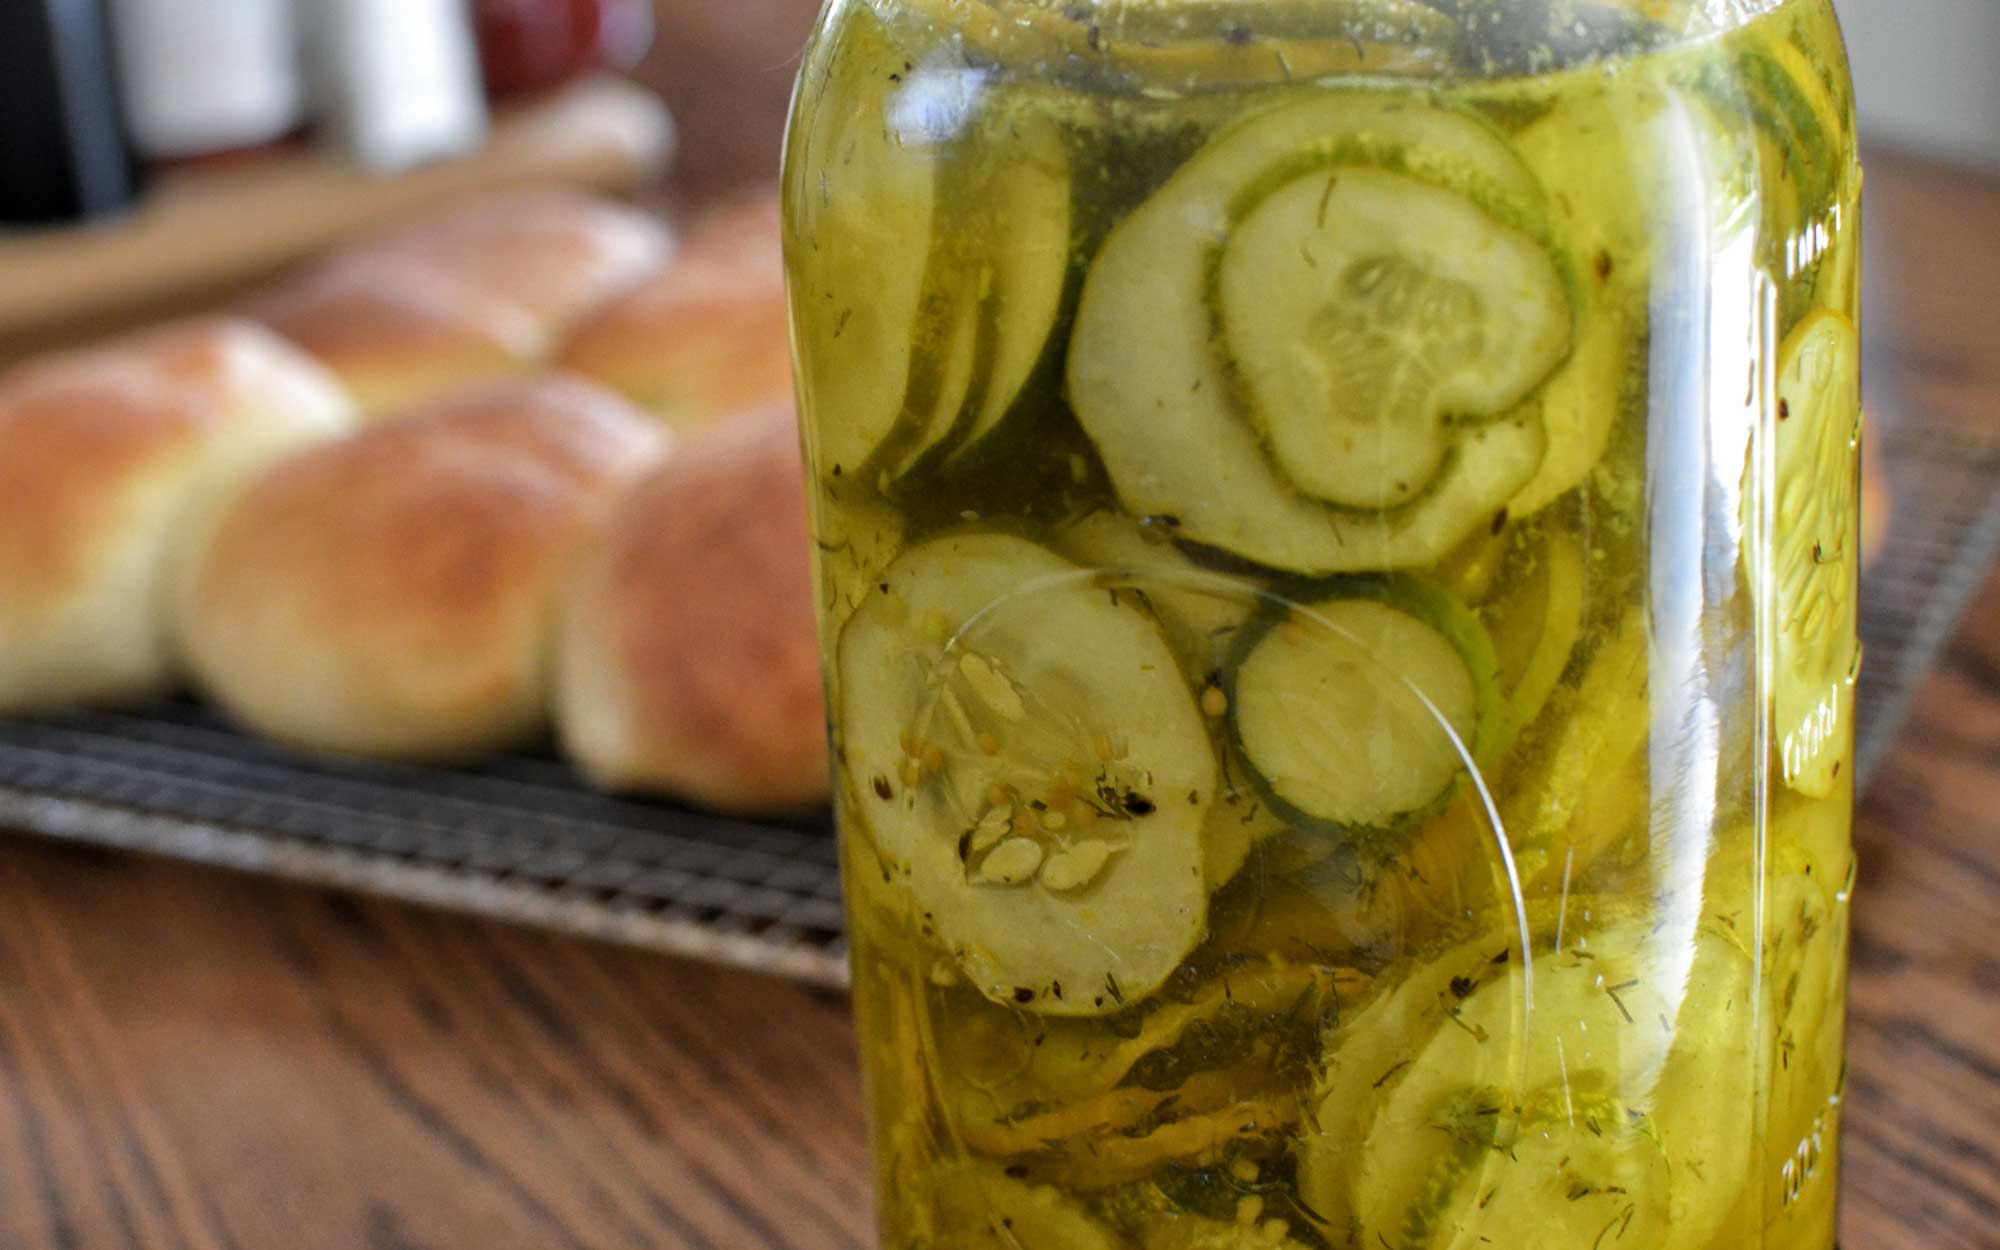 bread and butter pickles in a jar in front of a tray of baked rolls. Courtesy: jeffreyw (CC BY 2.0)